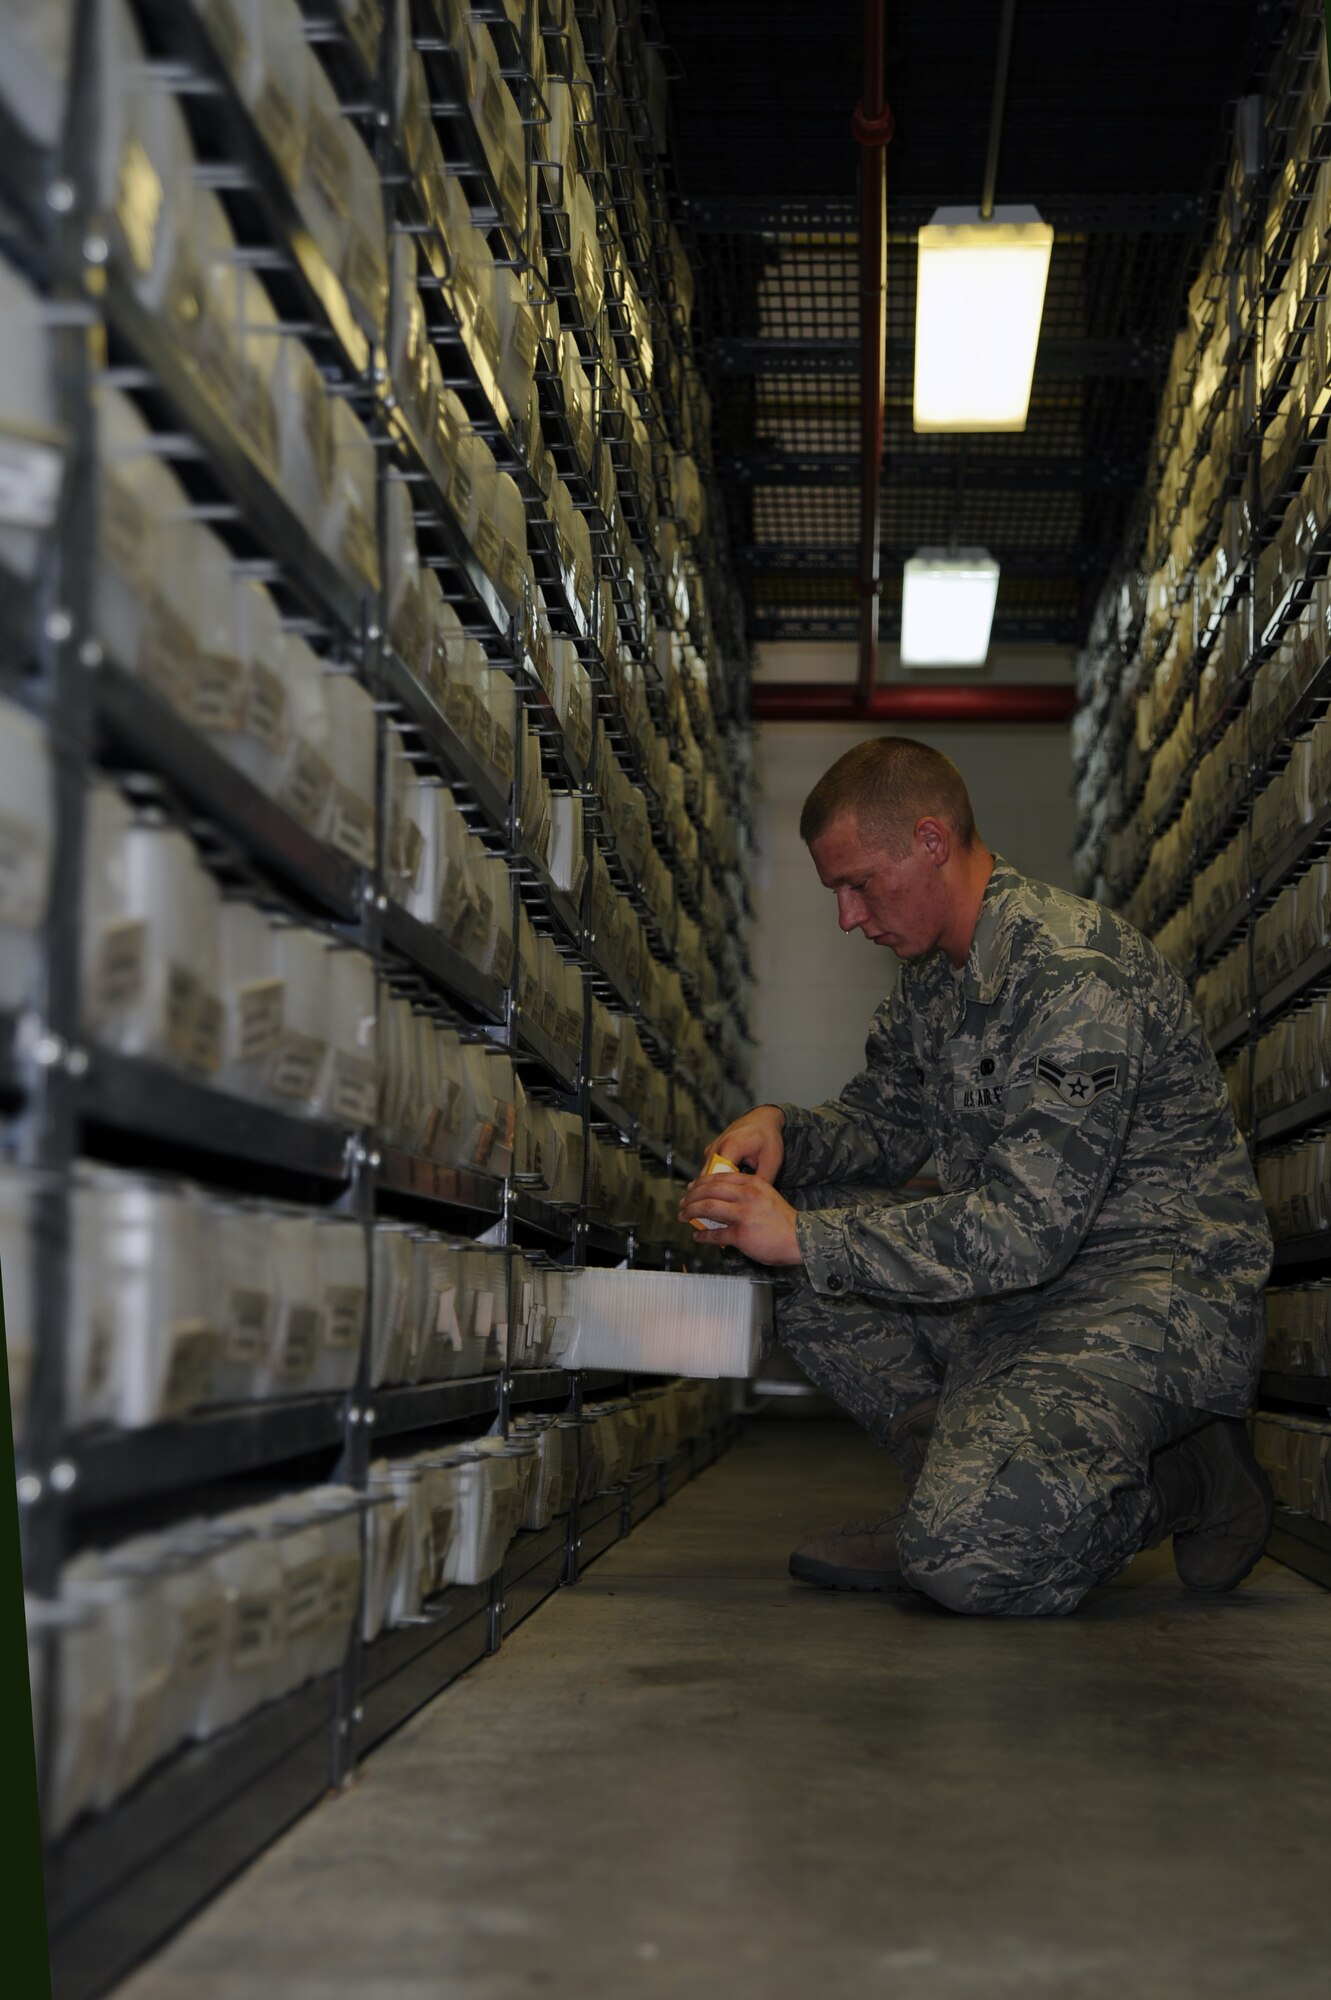 WHITEMAN AIR FORCE BASE, Mo., -- Airman 1st Class Ben Smyser, 509th Logistic Readiness Squadron Aircraft Part Store technician, fills a maintenance order that is needed for an aircraft on July 14.
(U.S. Air Force photo/Staff Sgt. Jason Huddleston) (Released)

